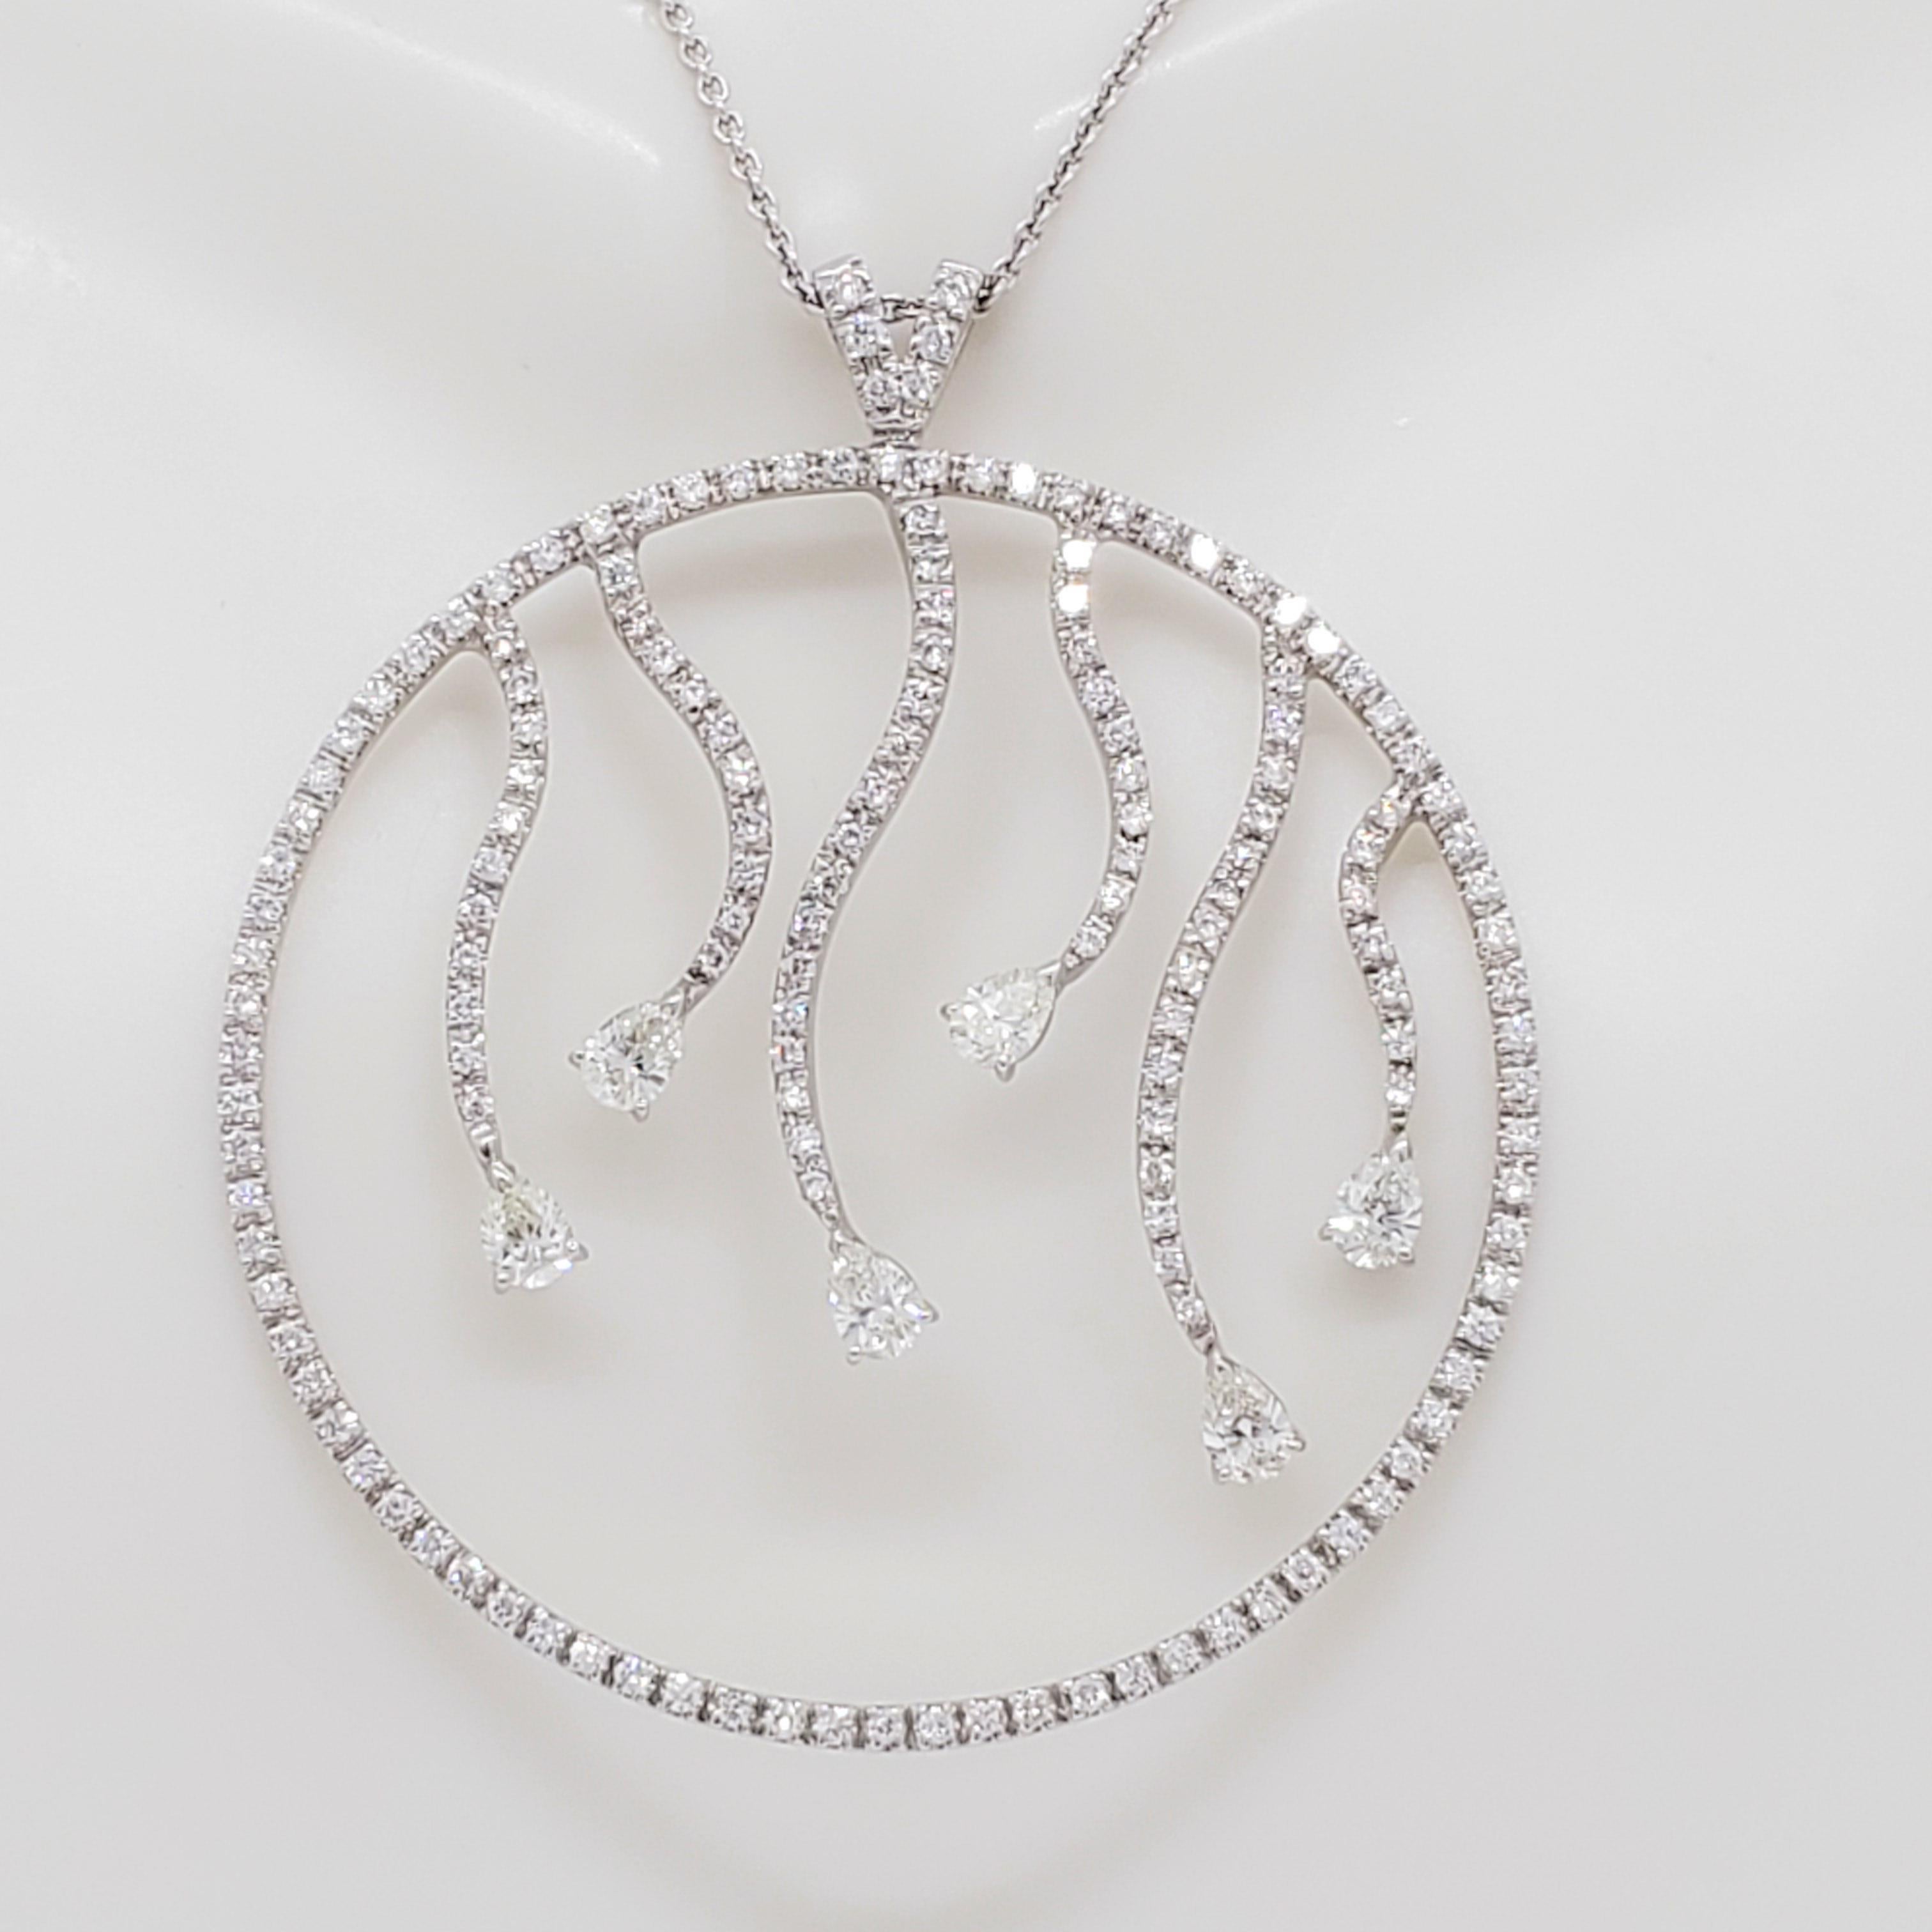 Gorgeous pendant necklace by Zydo with 3.00 ct. good quality, white, and bright diamond pear shapes and rounds.  Handmade mounting in 18k white gold.  Length is 18